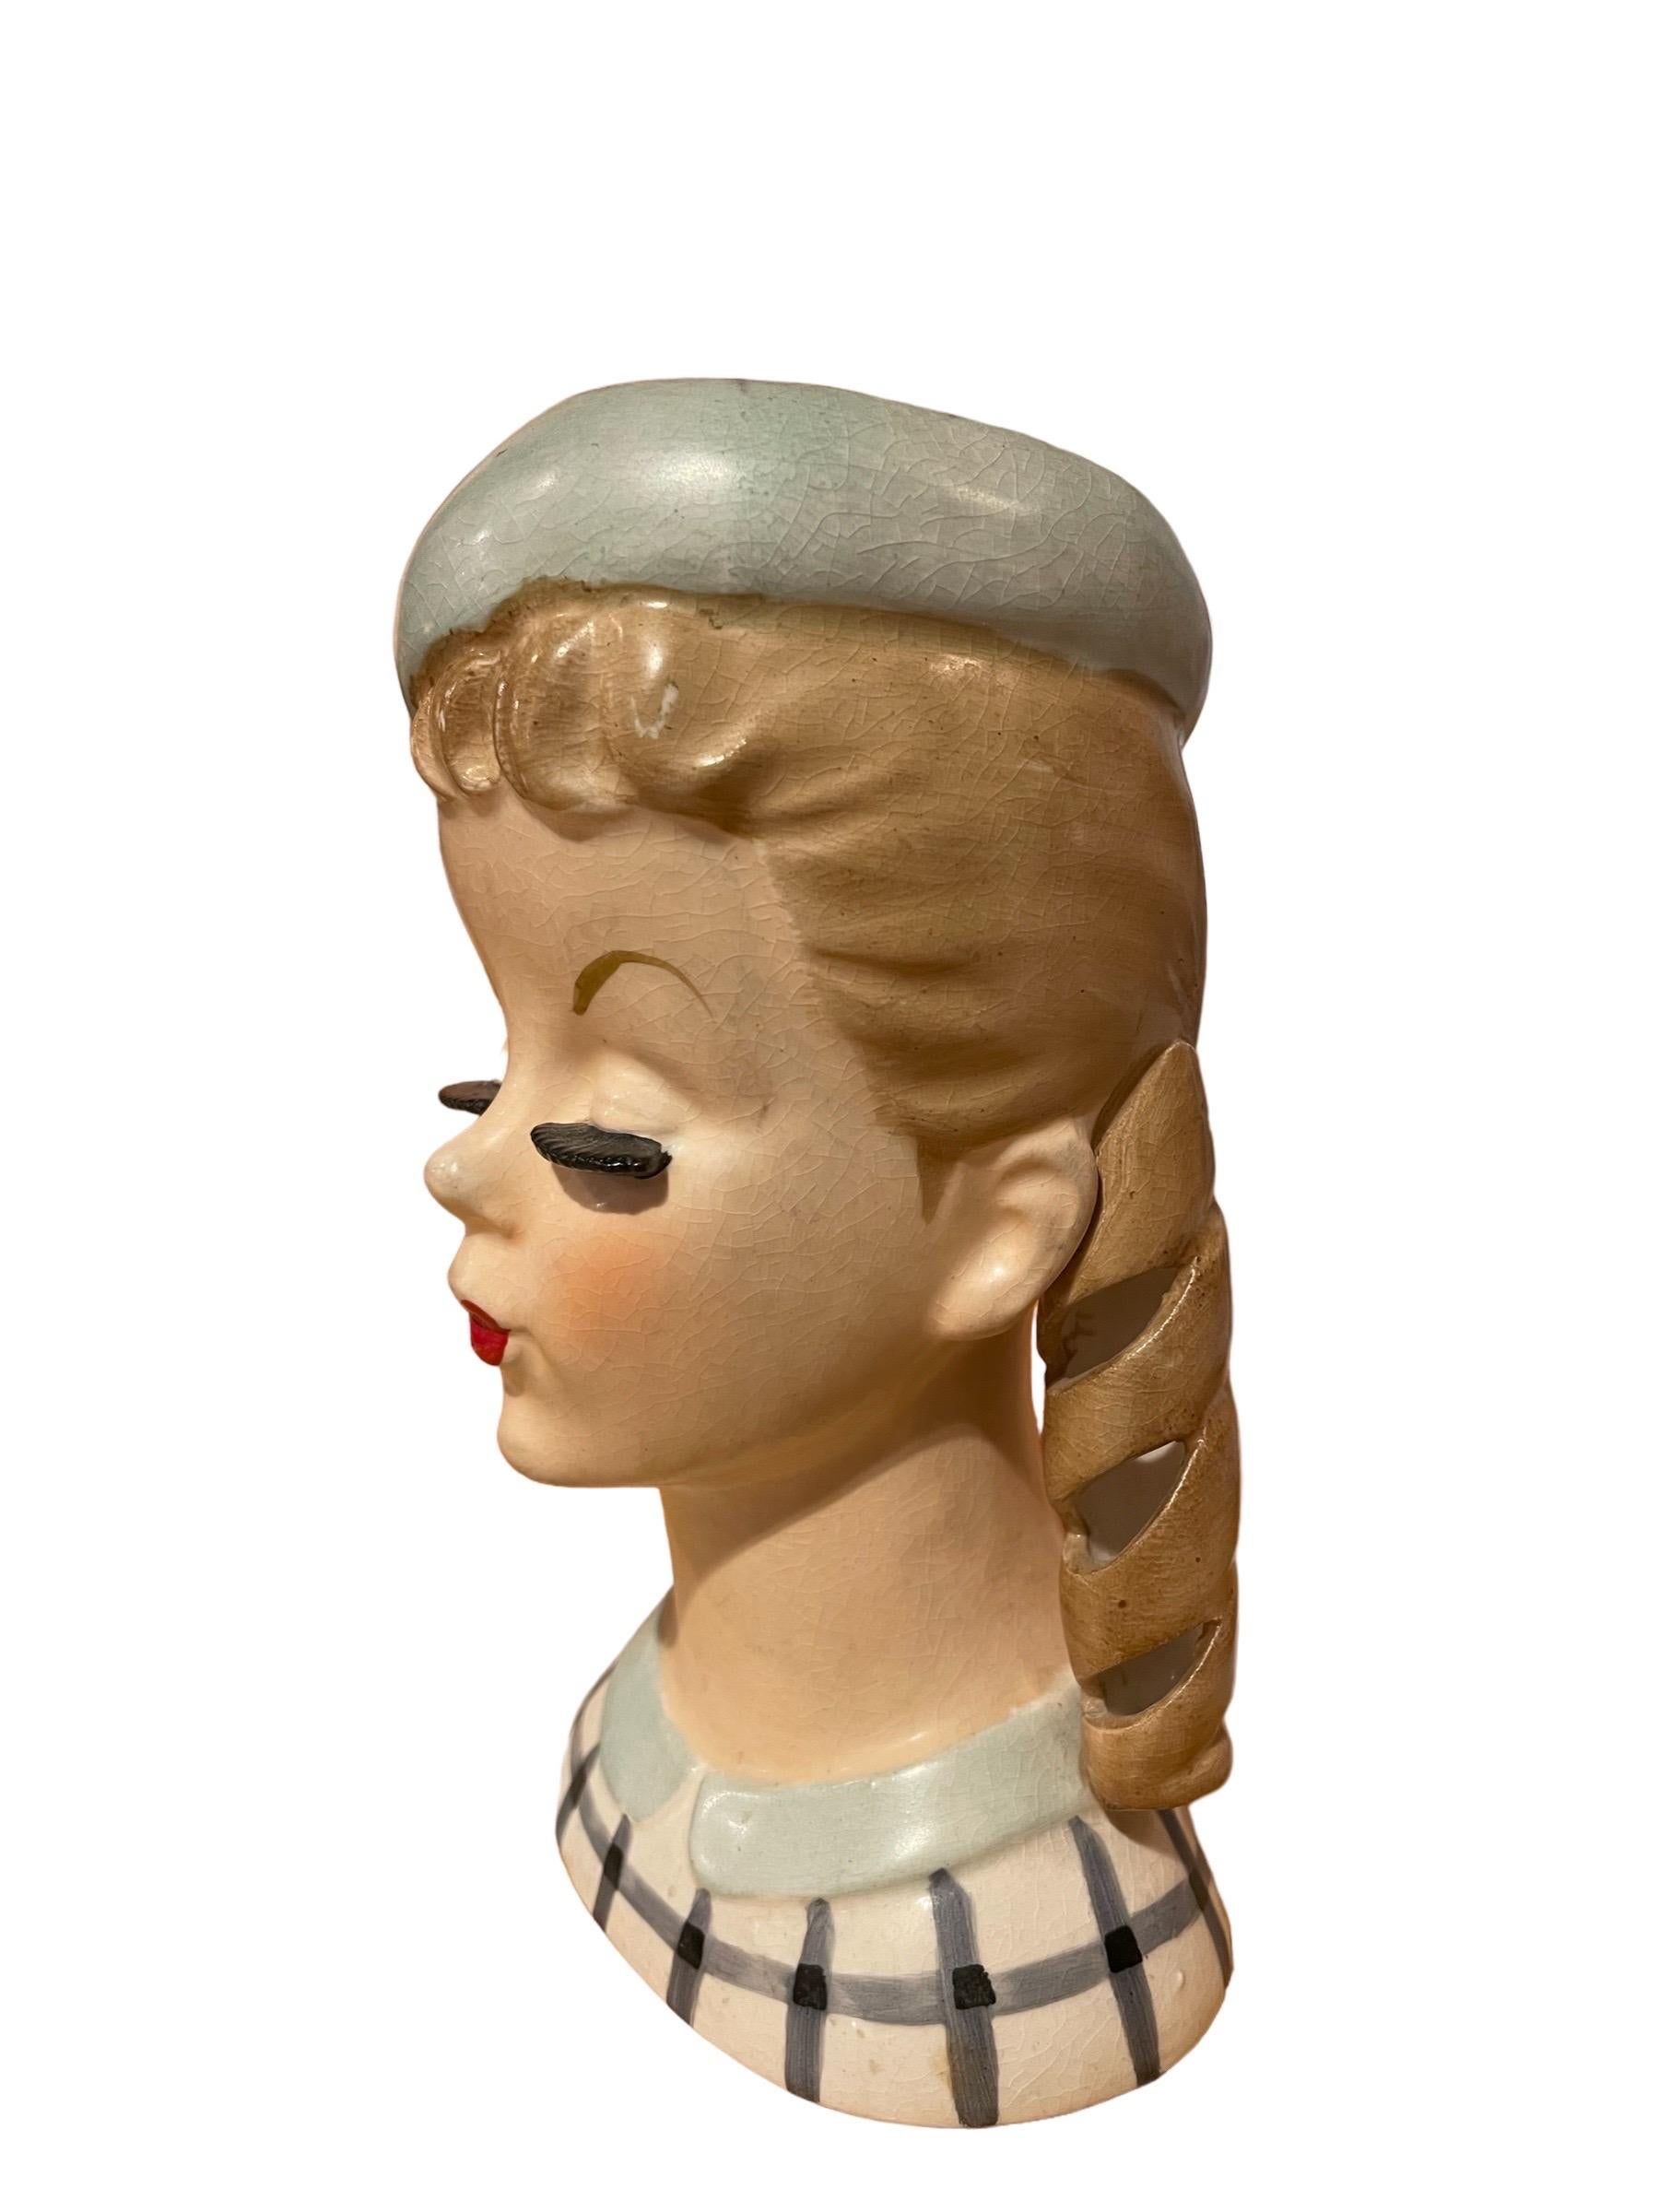 1950s Lady Head Vase with Banana Curls and Beret 

1950s Lady Head Vase with Banana Curls, Beret, Teal Peter Pan Collar, and Plaid Top 

Nippon Yoko Boeki Japan 
About 6” high, 4” length

In good vintage condition but not perfect, see photos and